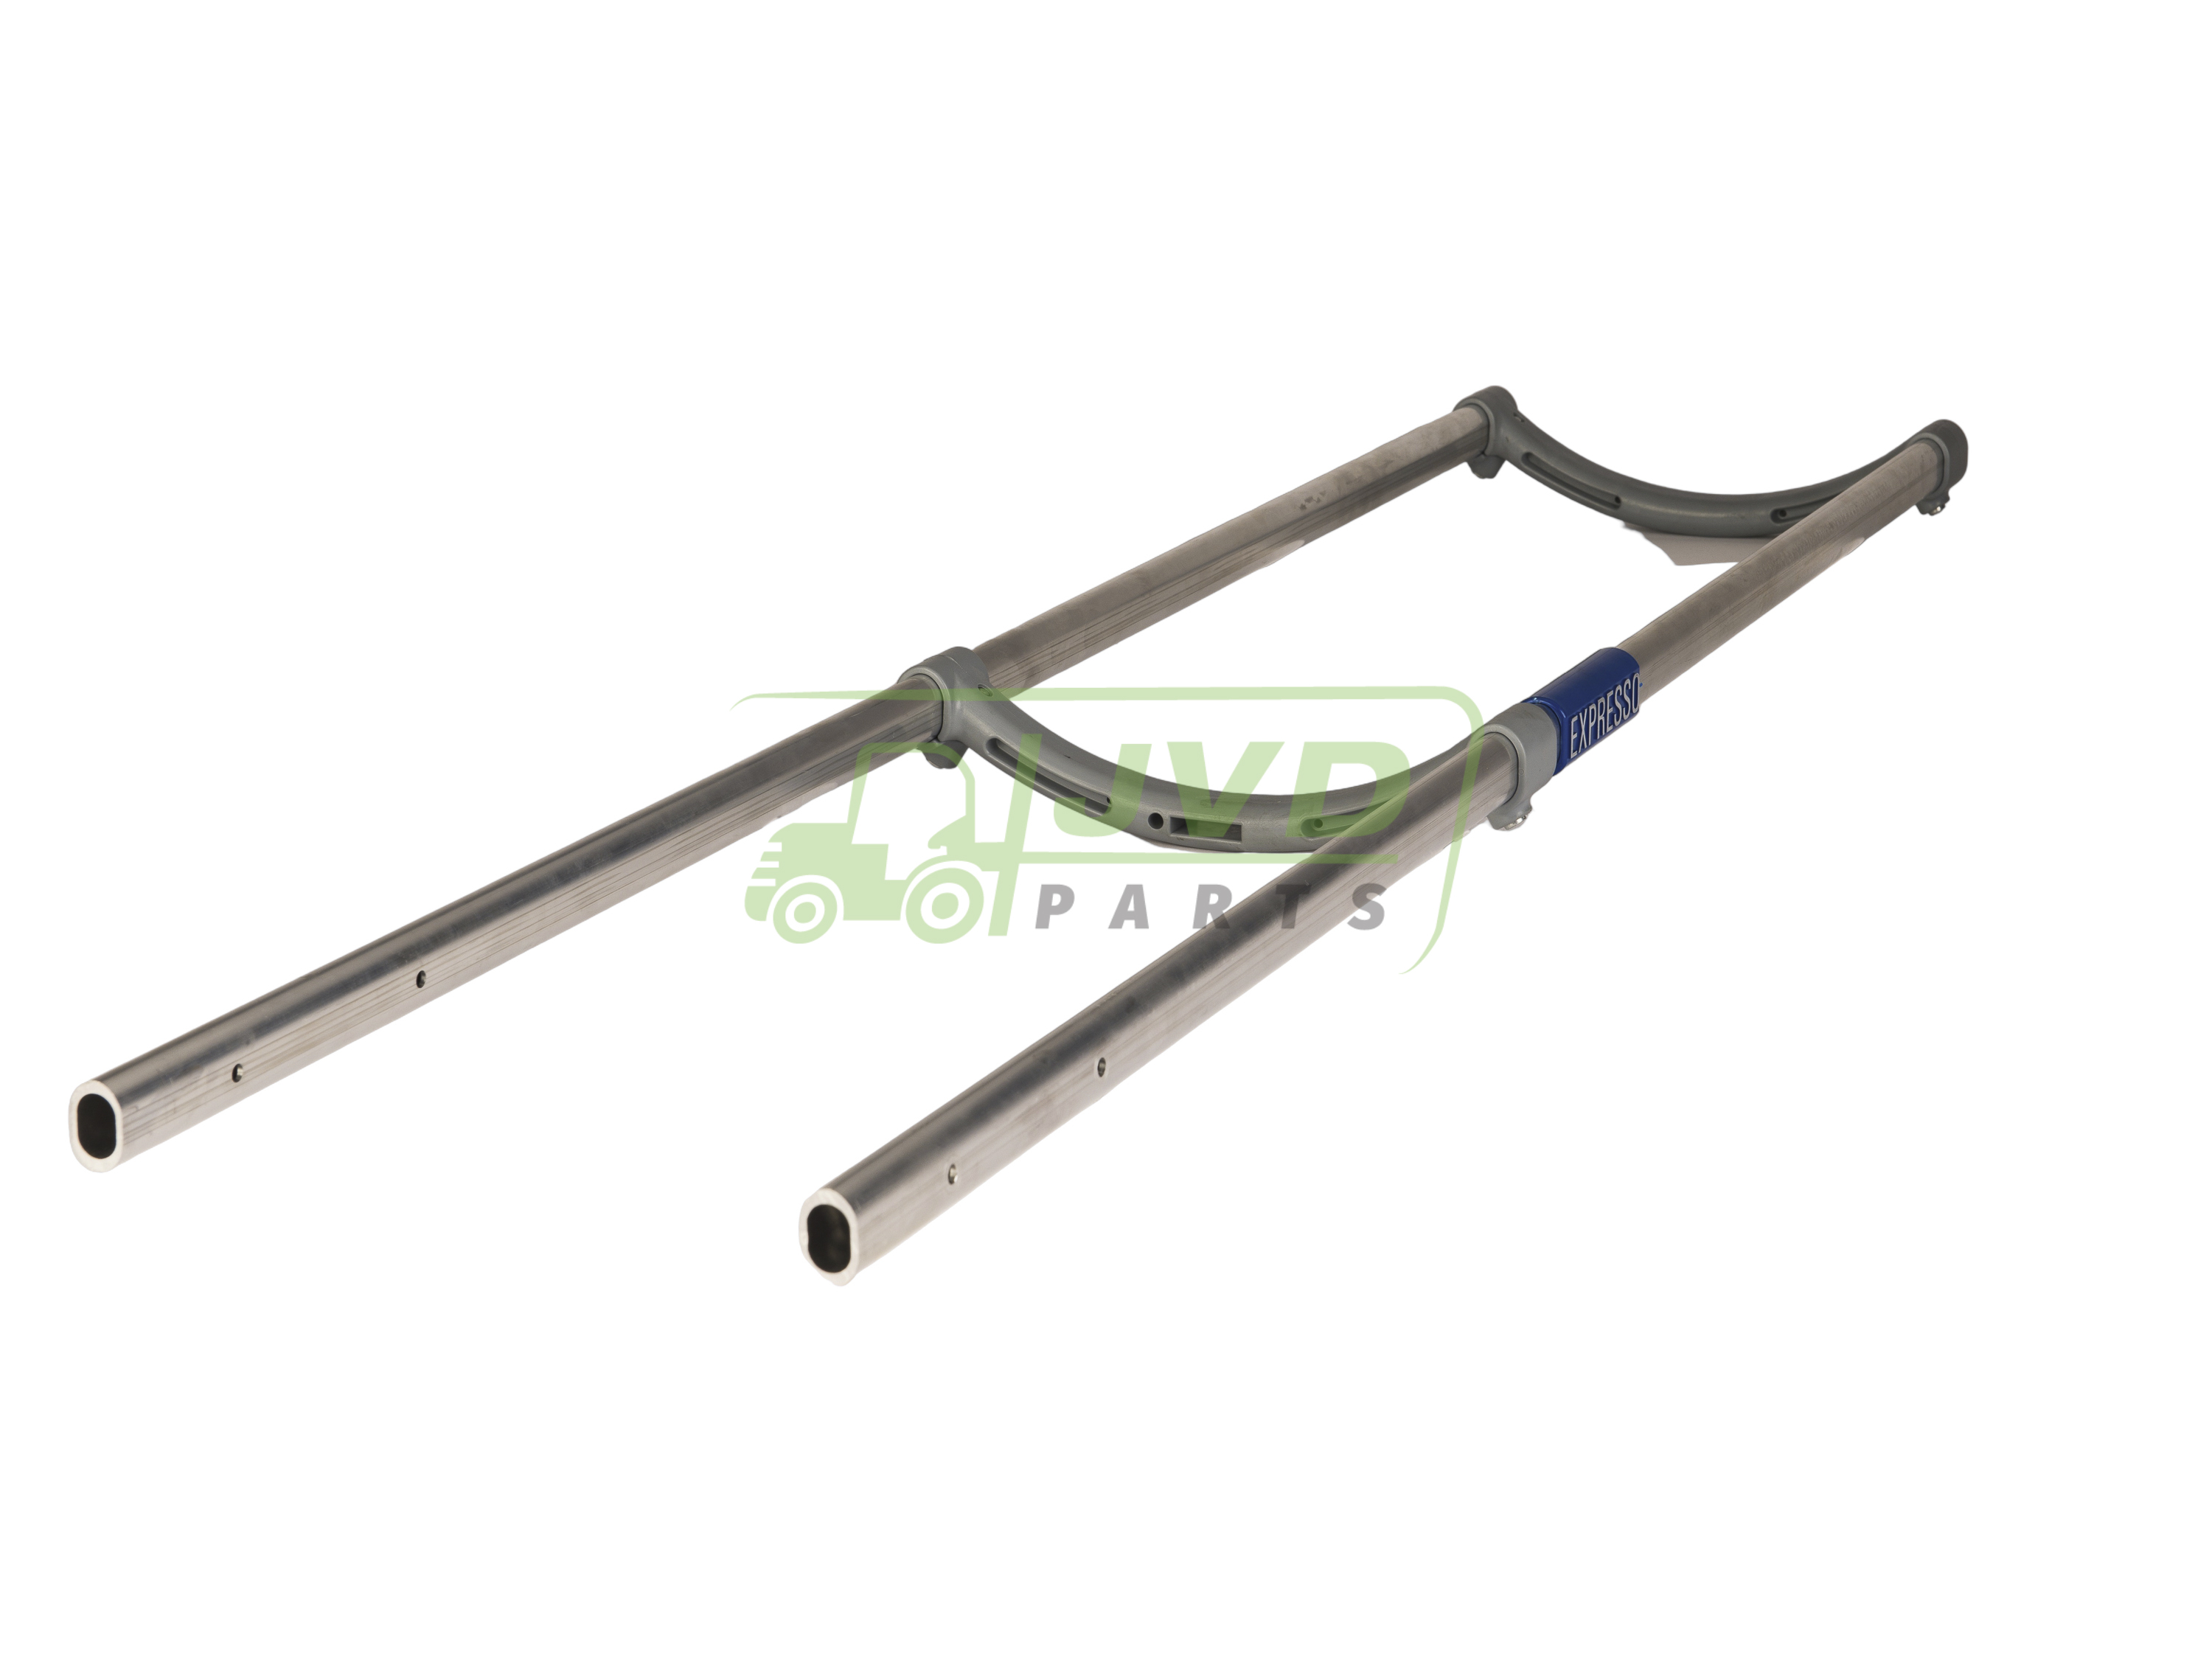 Expresso Chassis 1300mm - 1011742